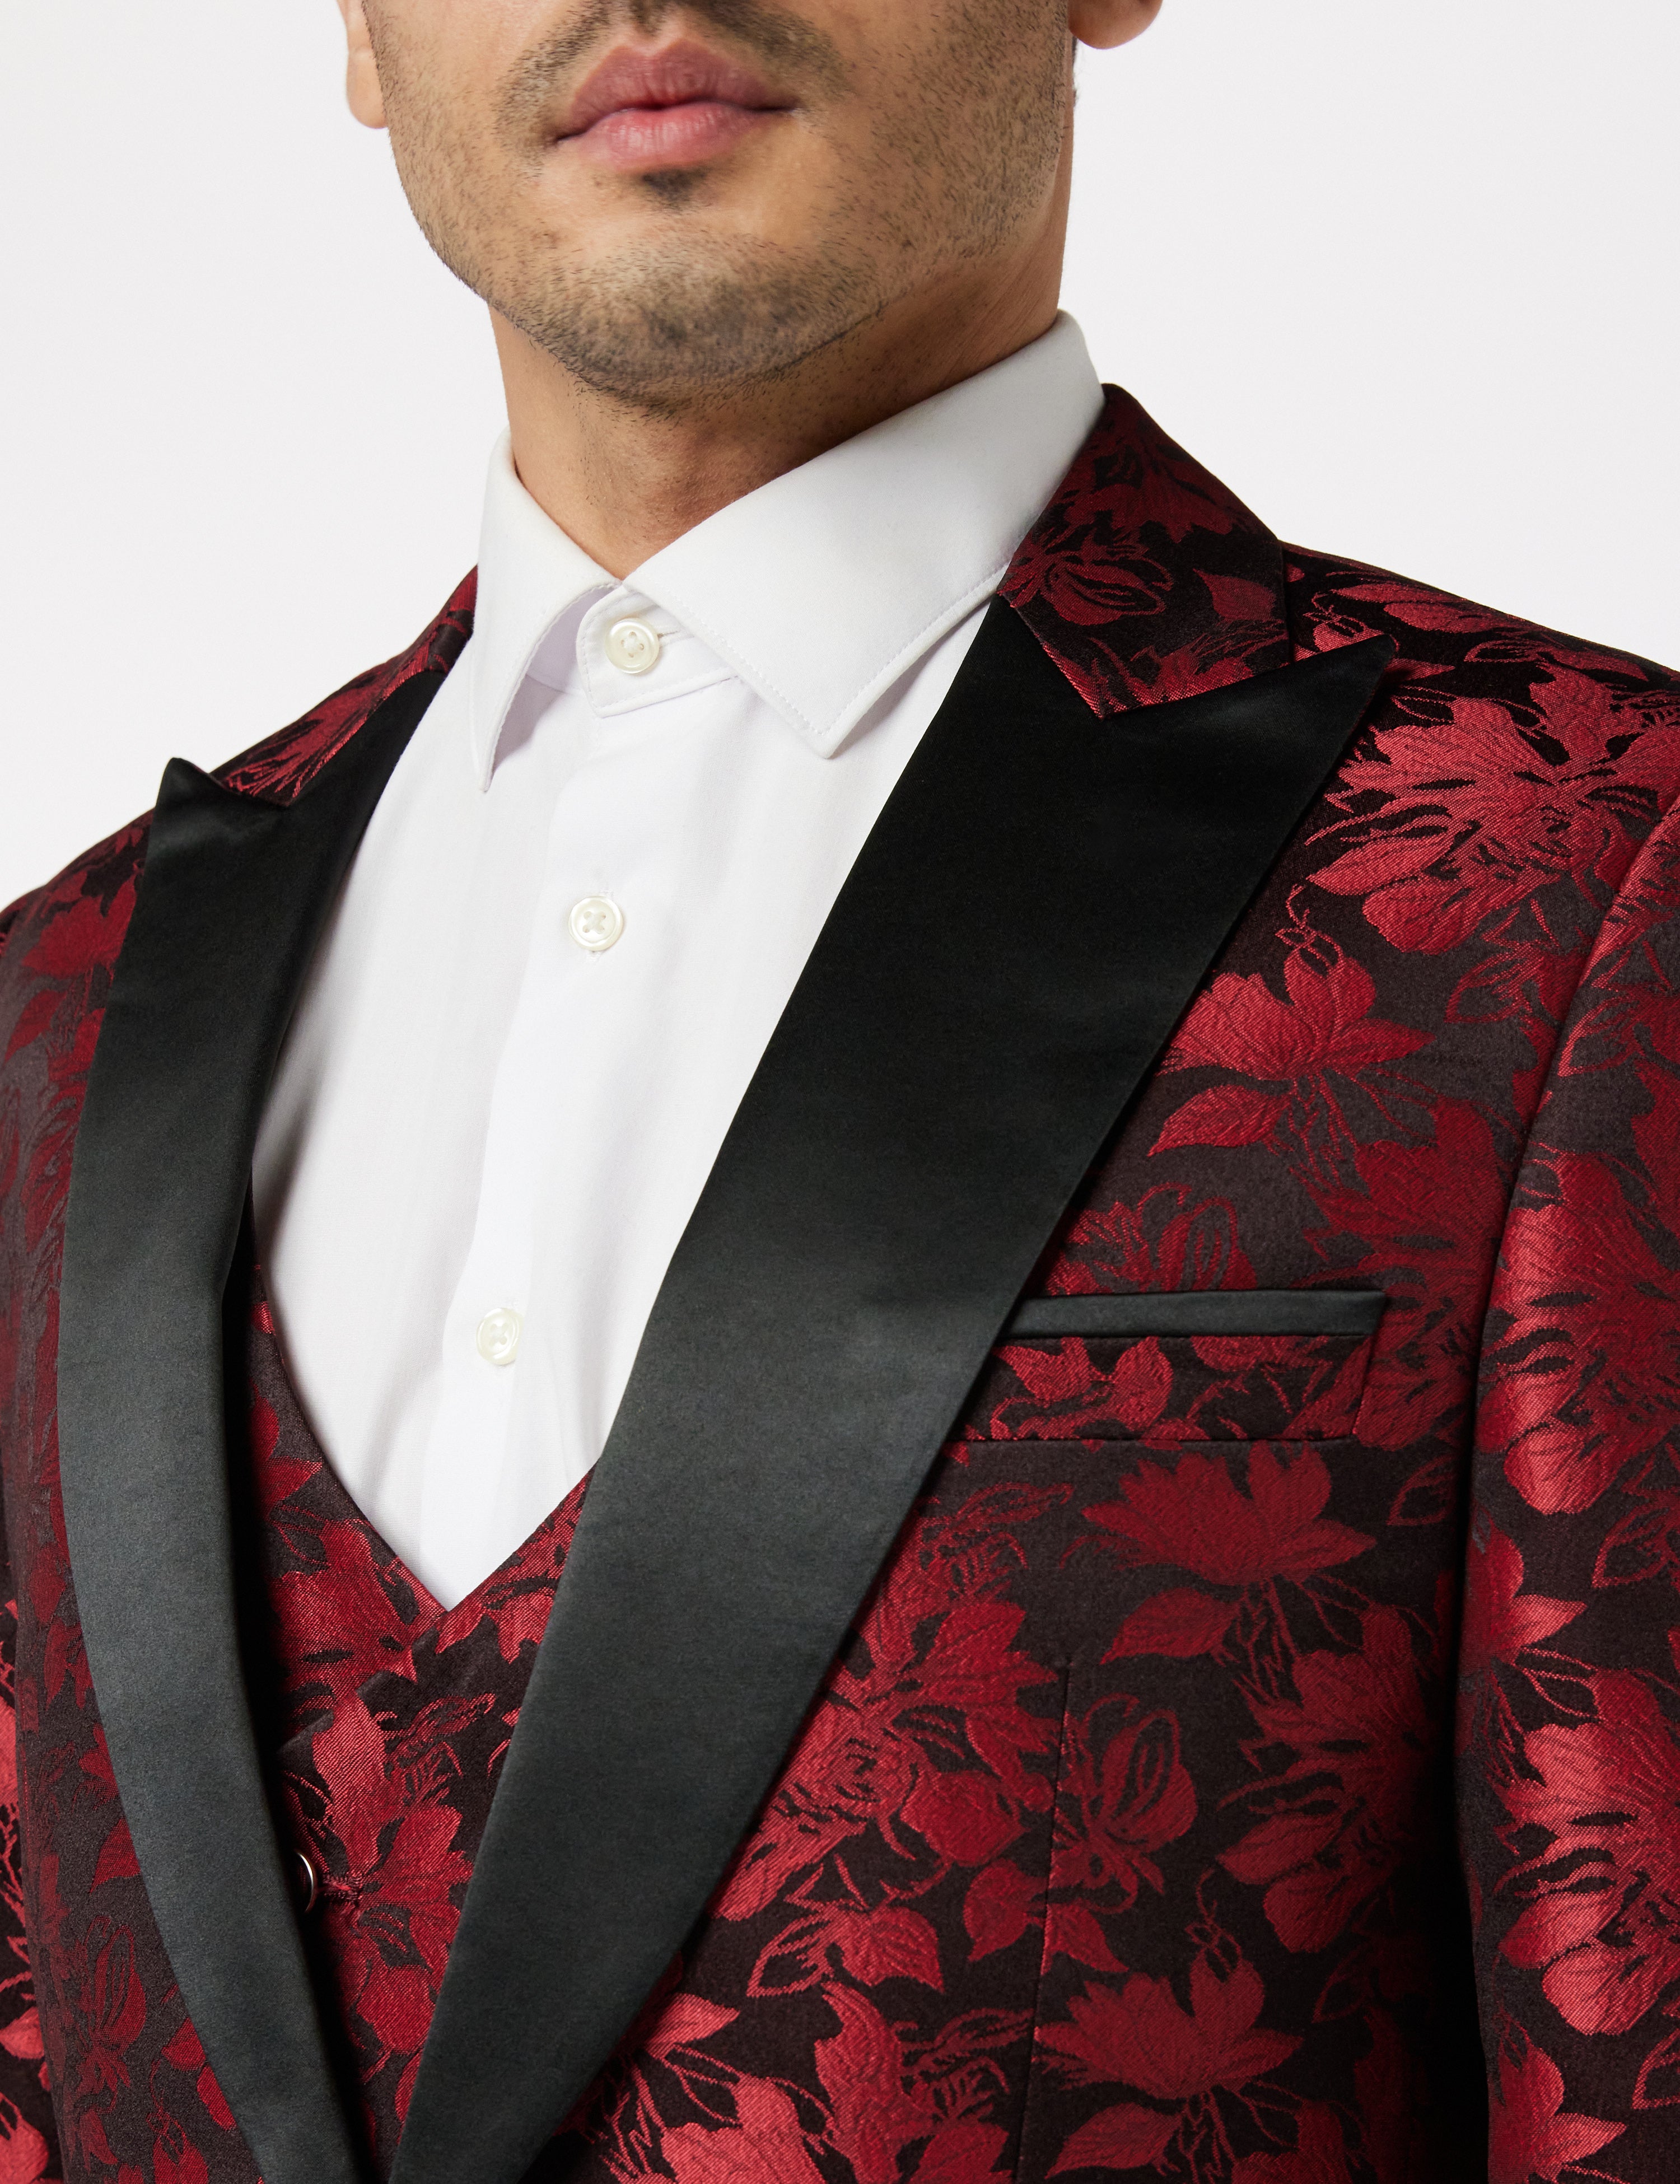 Mens Grooms 3 Piece Wedding Suit Vintage Paisley Classic Tailored Tuxedo Jacket Red